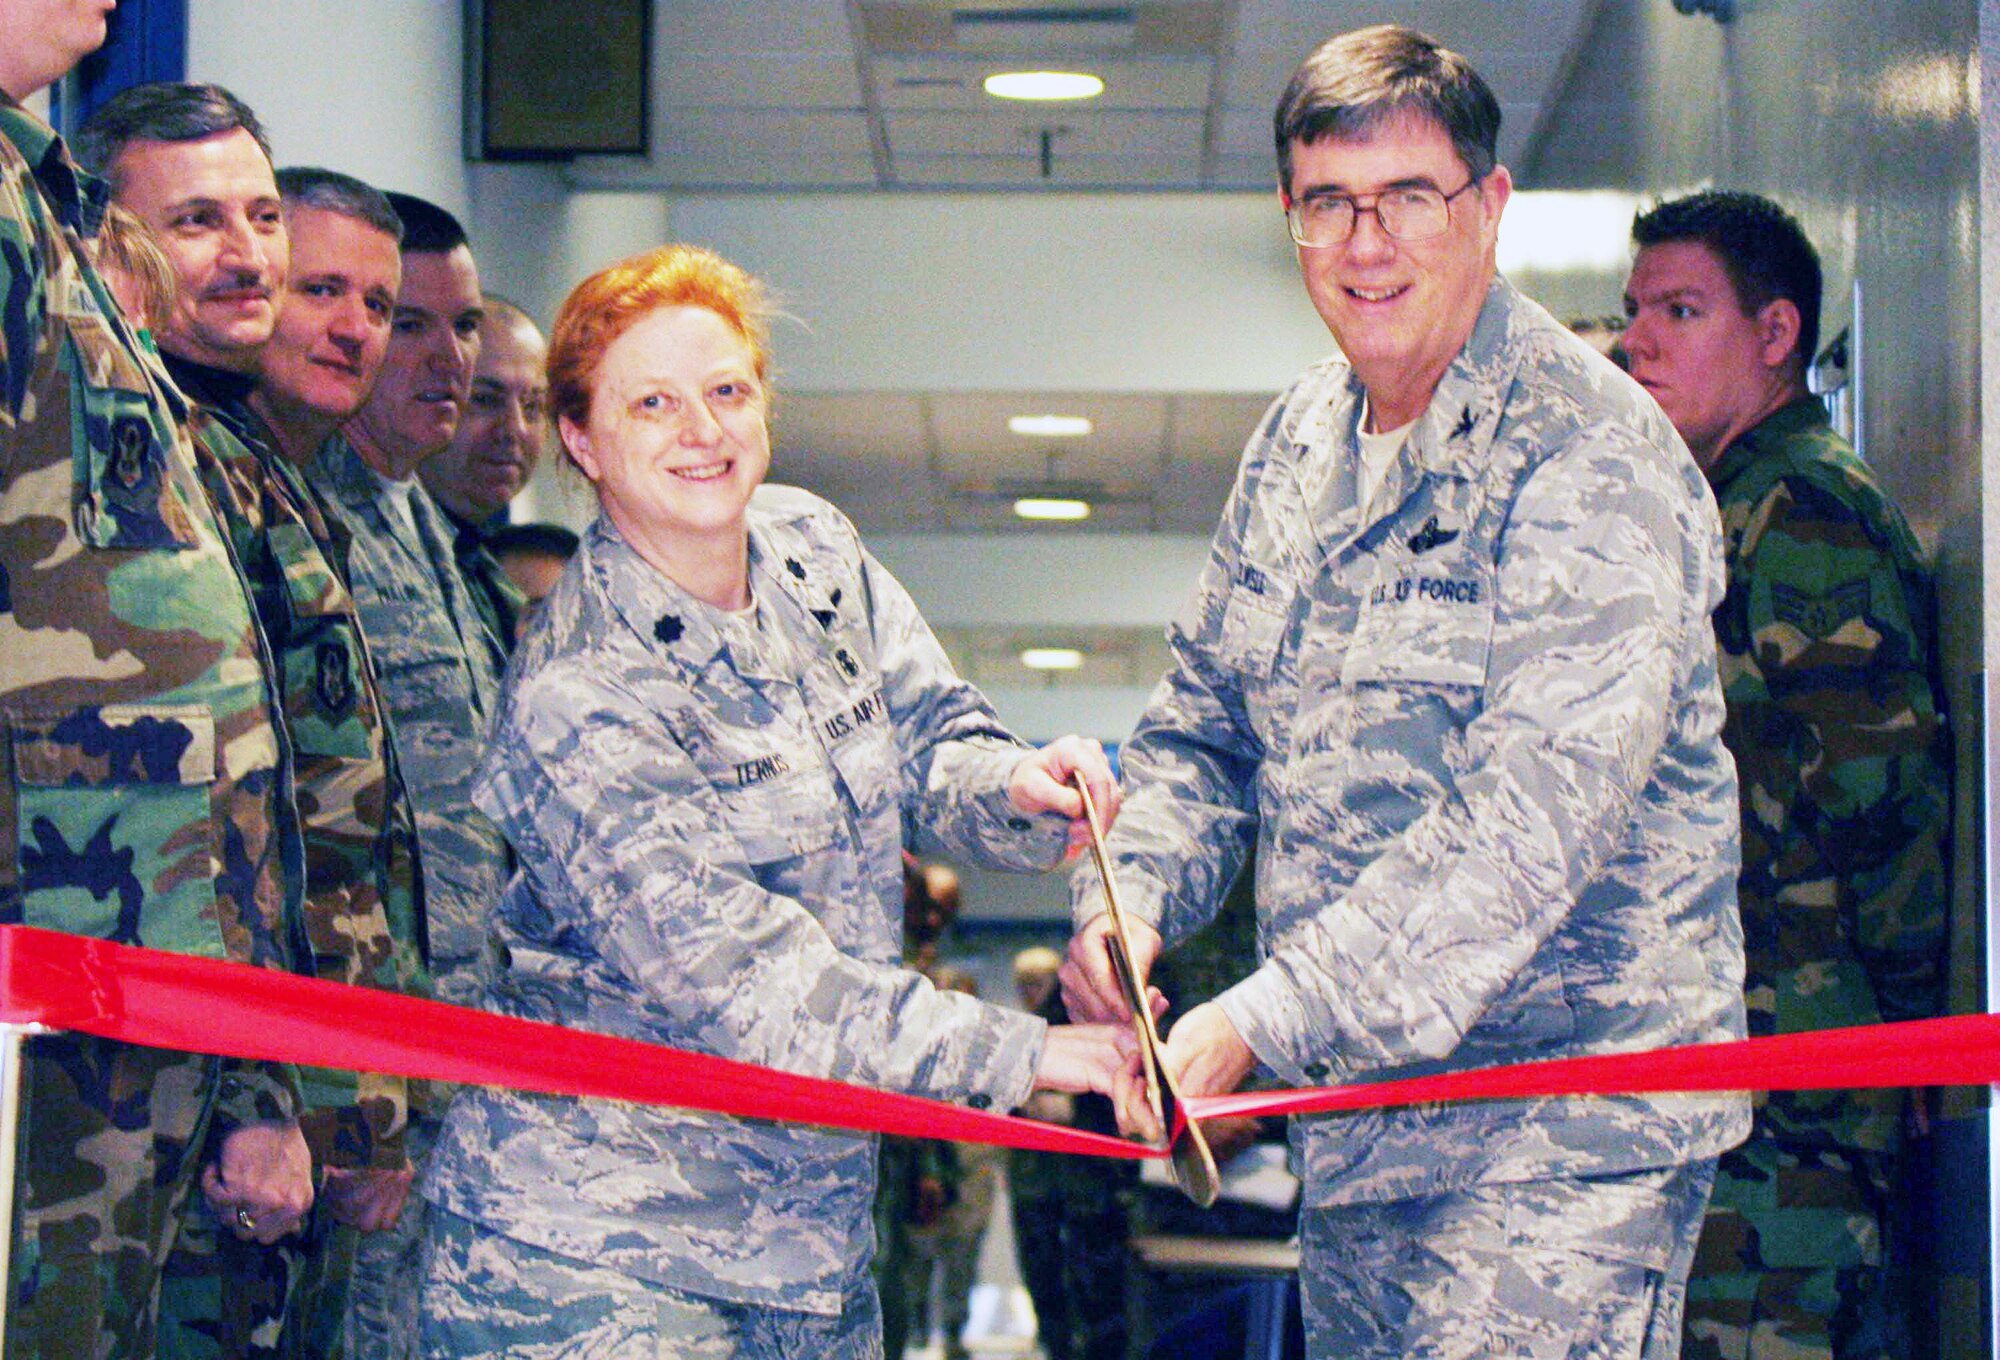 Col. Gordon Elwell, 911th Airlift Wing Commander and Lt. Col. Mona Ternus, 911th Aeromedical Staging Squadron Commander, 911th AW cut a ribbon to commemorate the opening of the Medical Treatment Facility Annex. Groundbreaking for the annex started in May 2007 and the first occupants setup shop in October 2008.